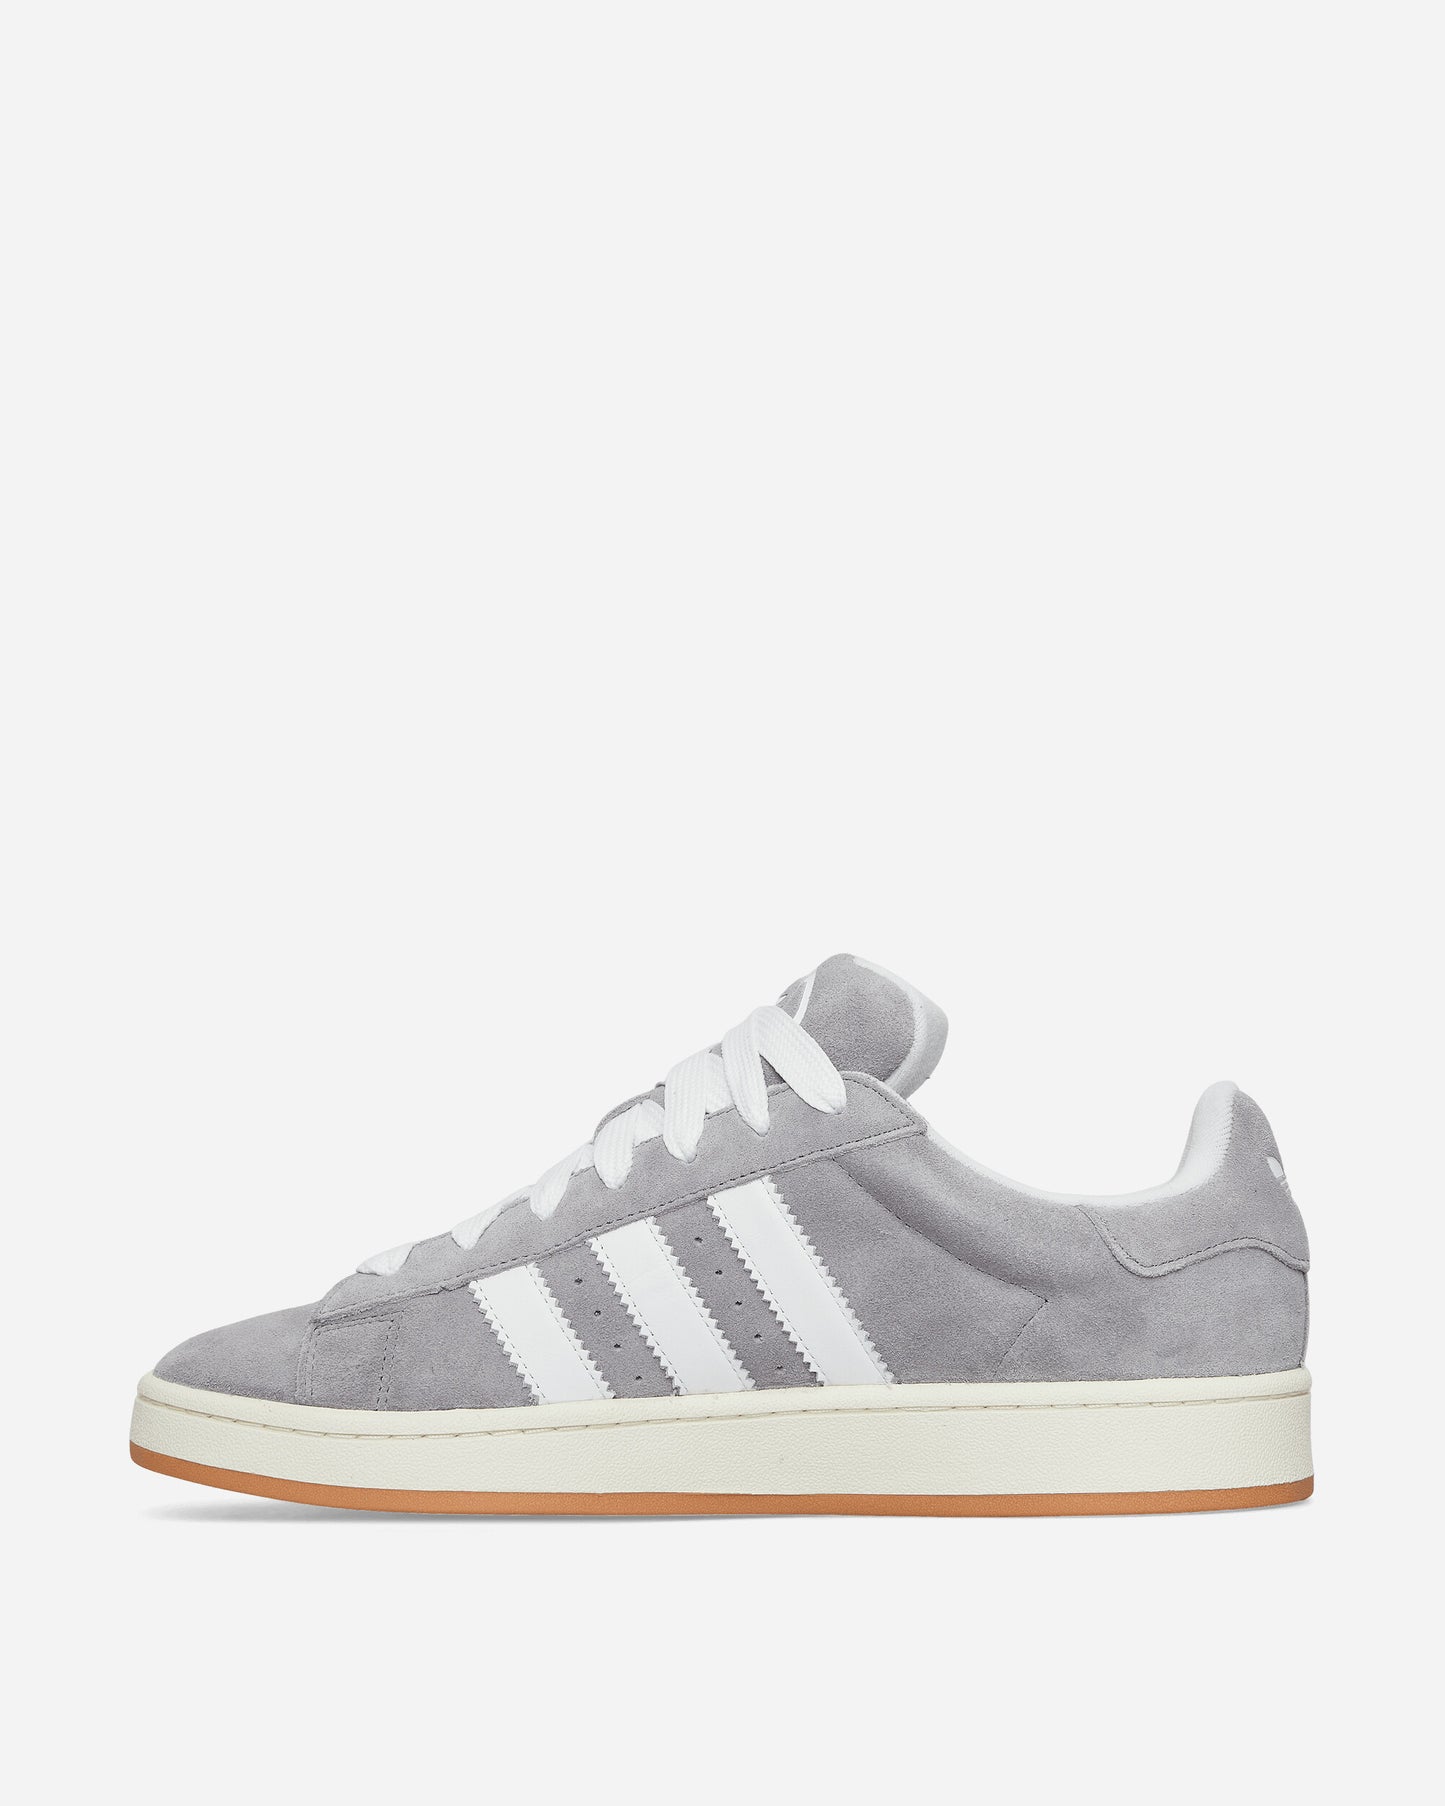 adidas Campus 00S Grey Three/Ftwr White Sneakers Low HQ8707 001